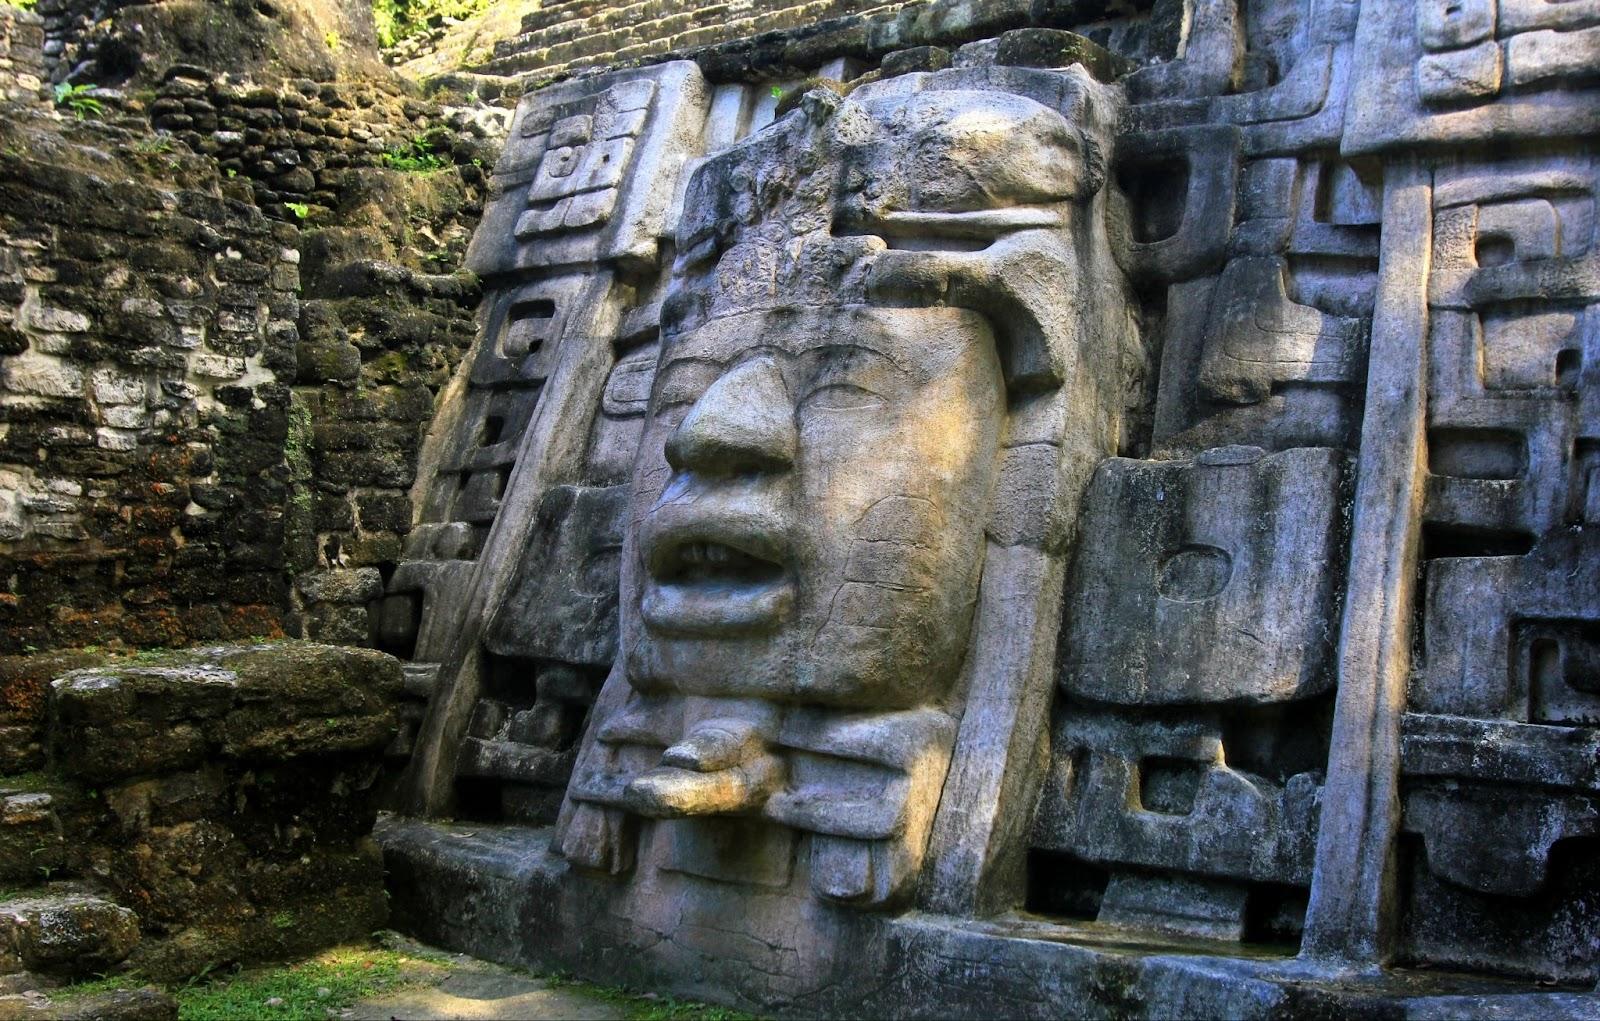 The Mask Temple in Mayan city of Lamanai, Belize